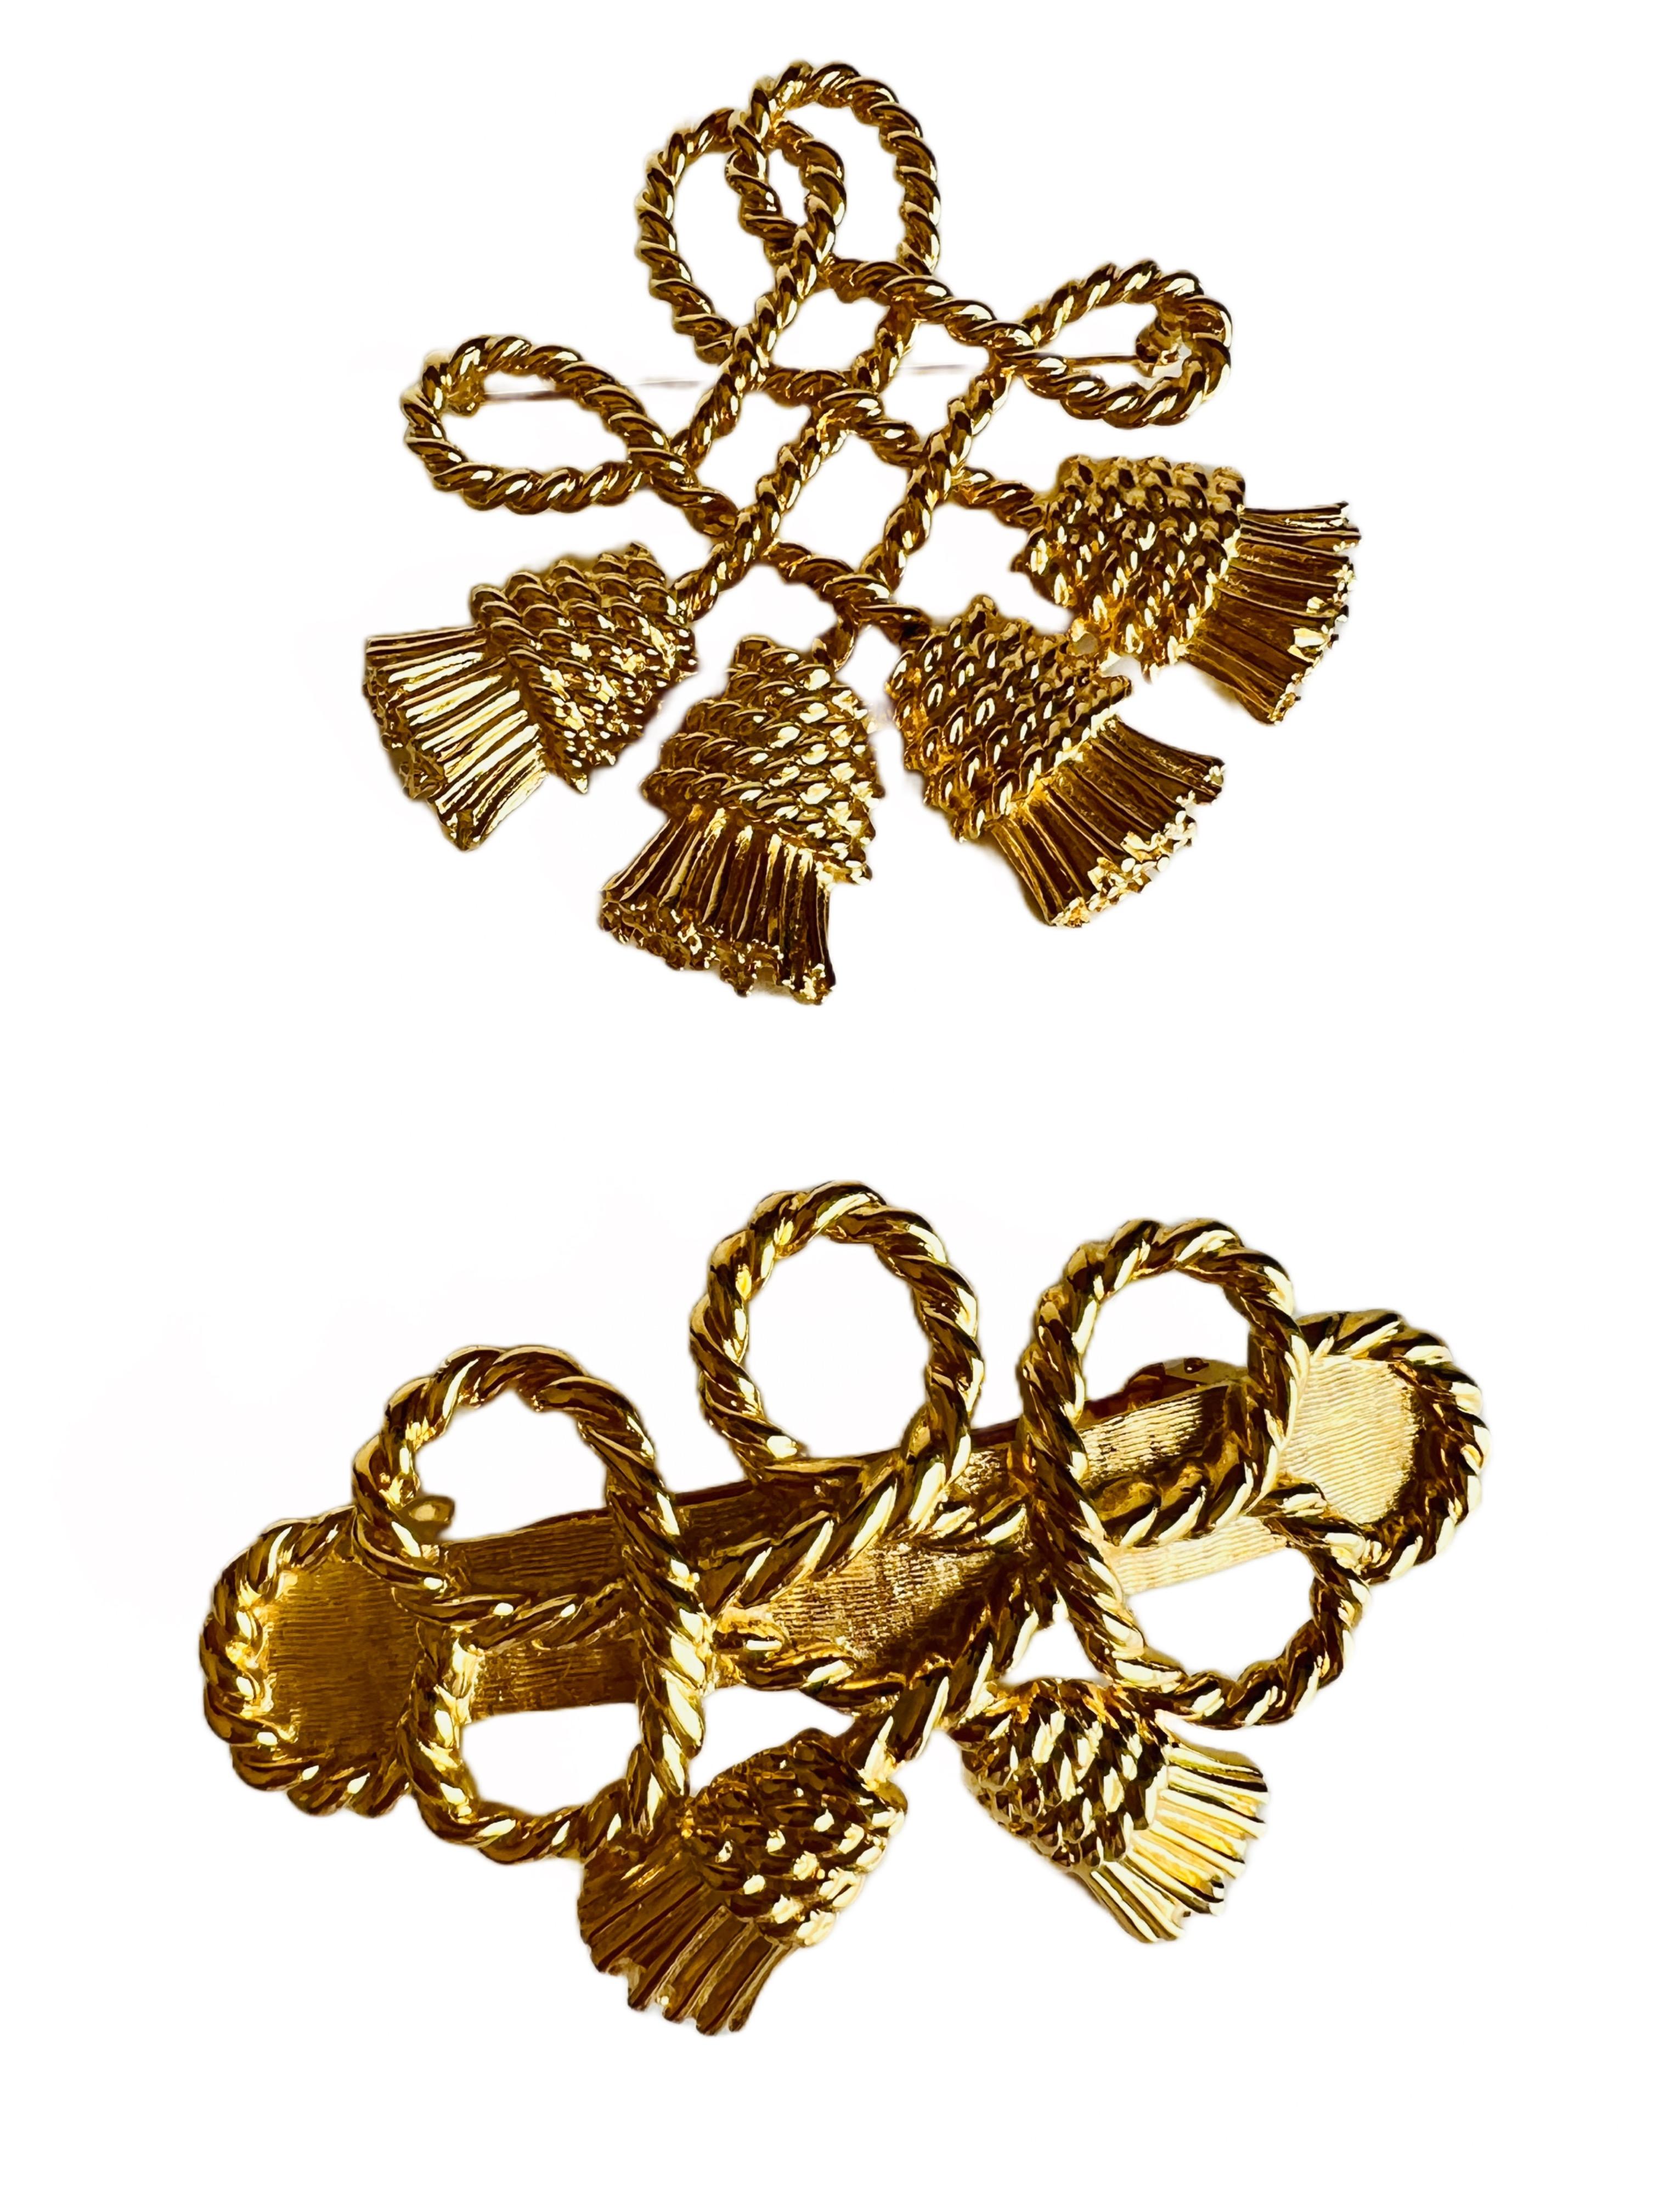 Lovely vintage gold plated brooch and matching barrette featuring a classic rope and tassel design.

Brooch Size: 3-1/8